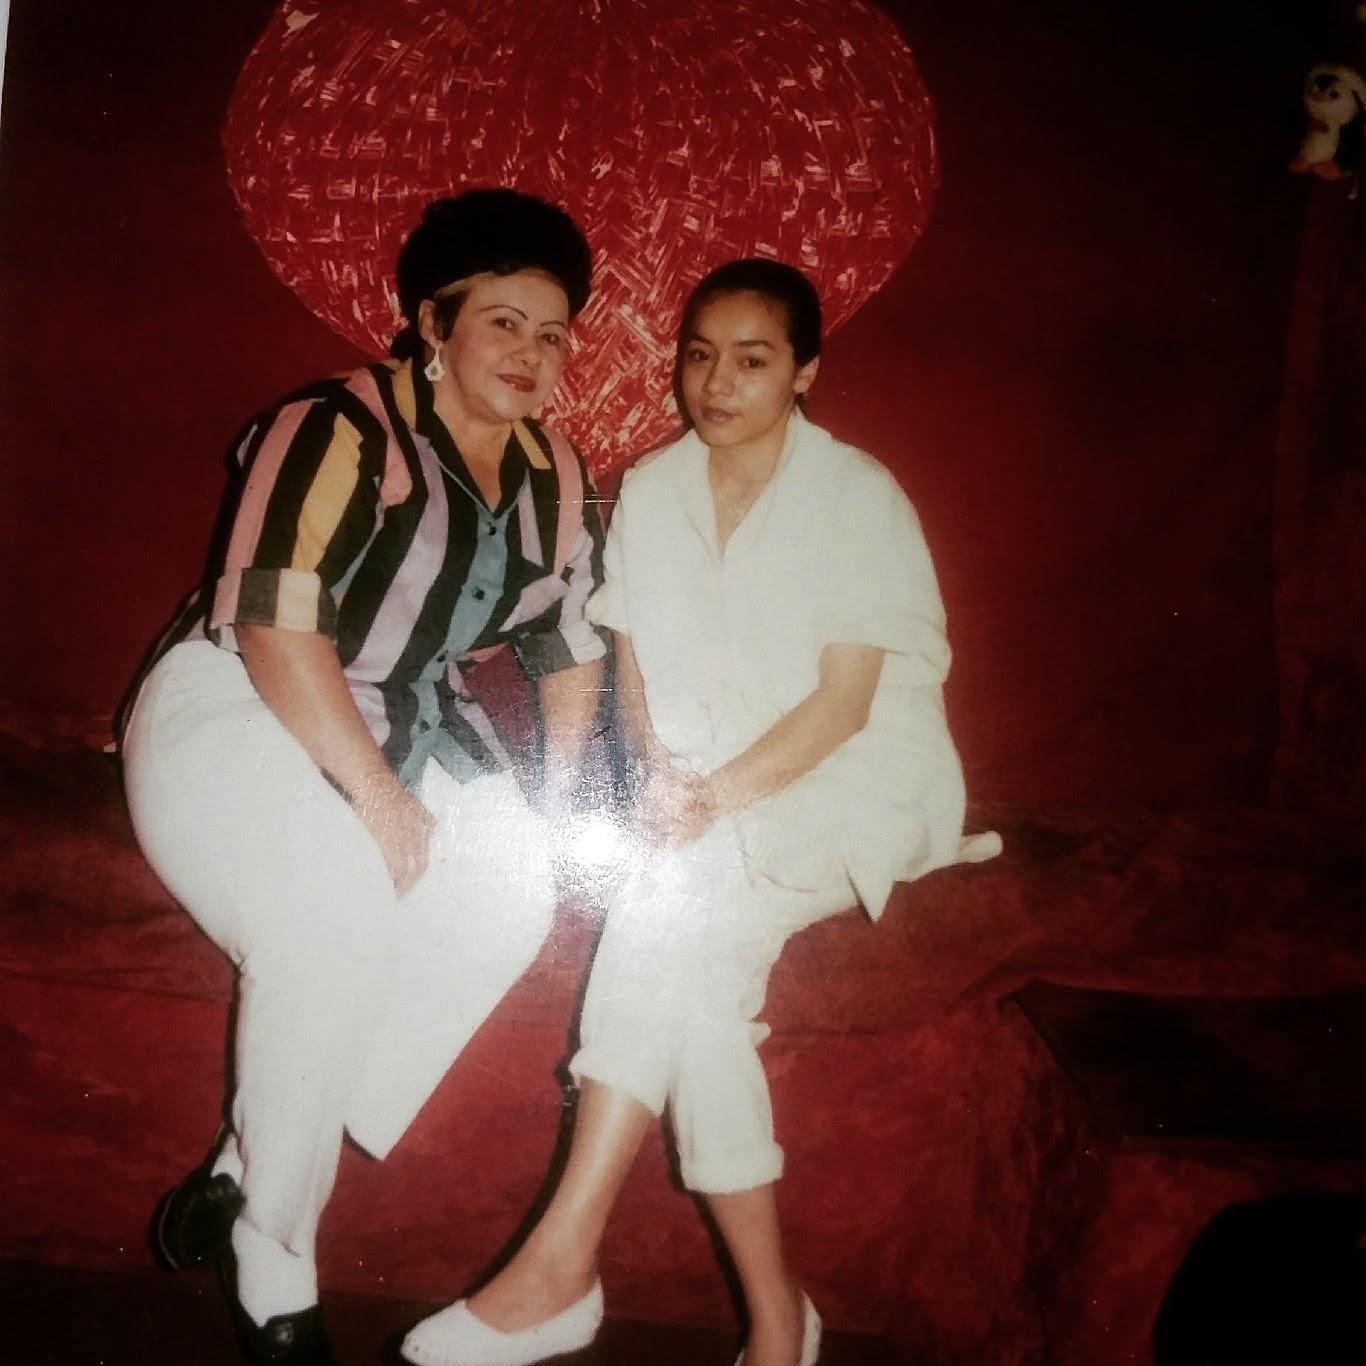 My sister Grisell Camacho (pictured one the right) was Murdered one cold February night in Vailsburg Newark, NJ in 2001. No one has been arrested for her murder. Her body was put in a bus at a gas station across from the McDonald's on 18th Ave PLEASE HELP ME FIND HER KILLER(S) Please!!!